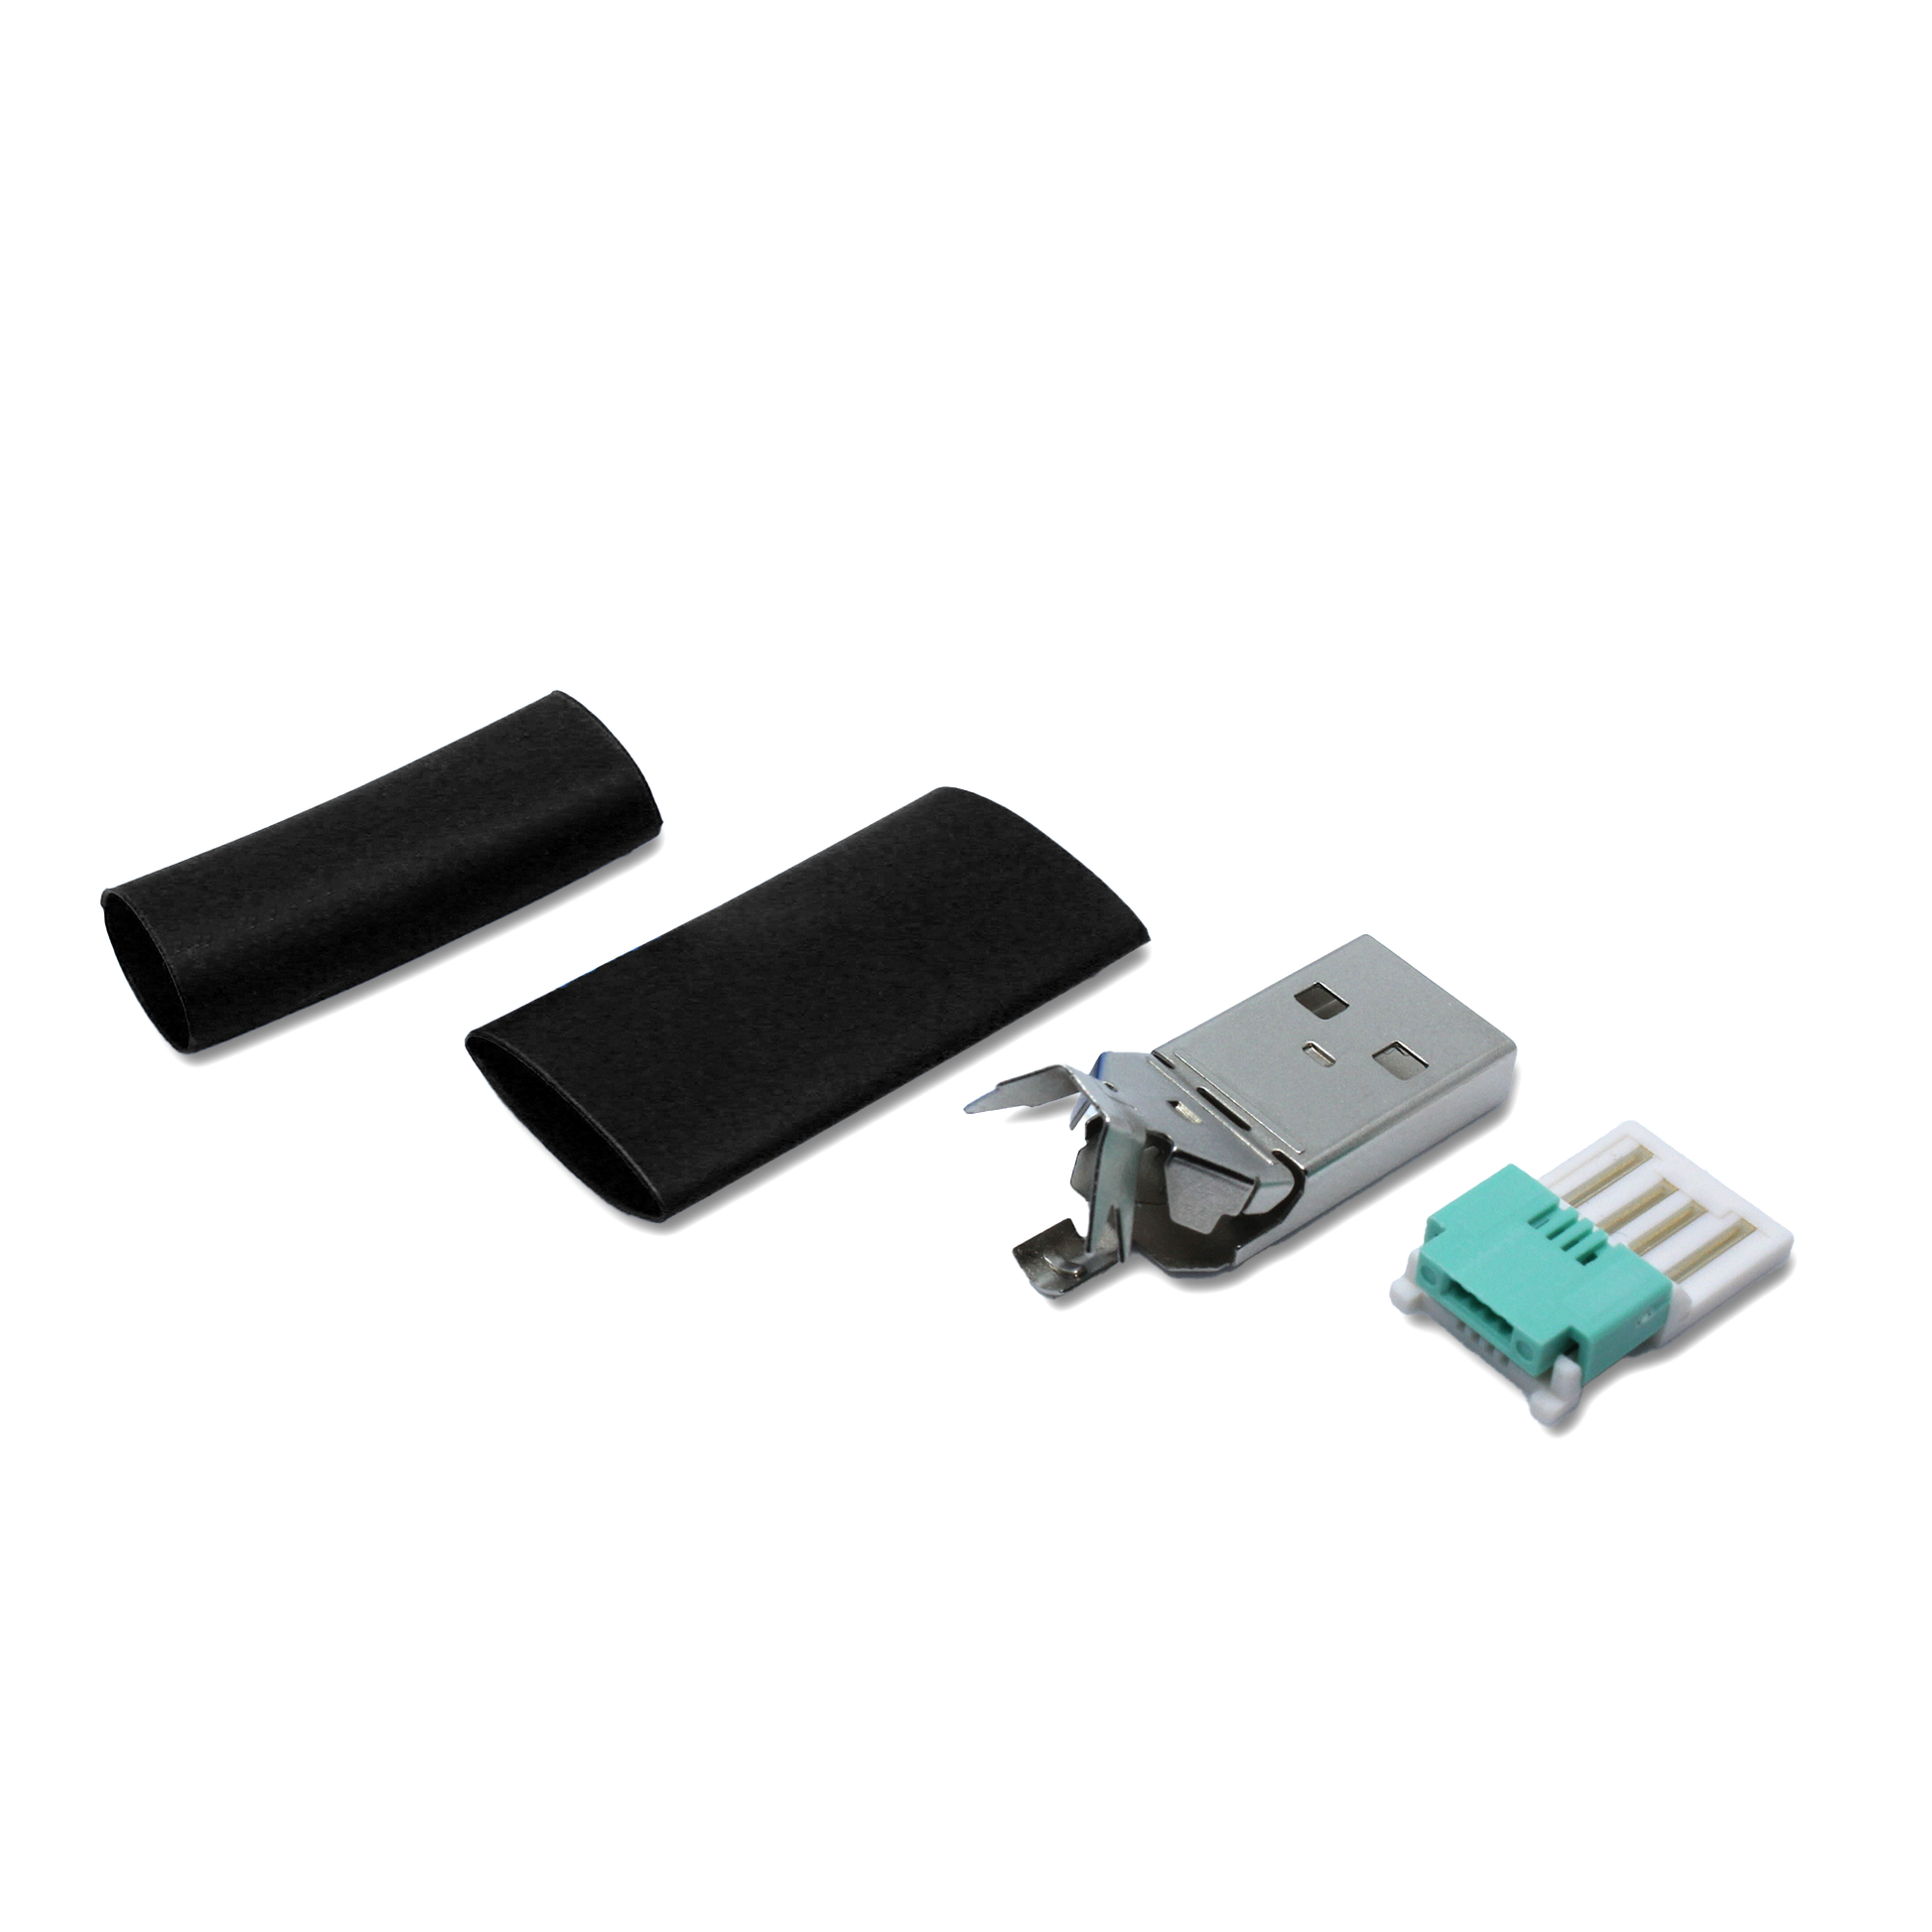 USB A plug black in single parts, with additional small heat shrink tube for repair (solderless/crimp) of thin USB 2.0 cables